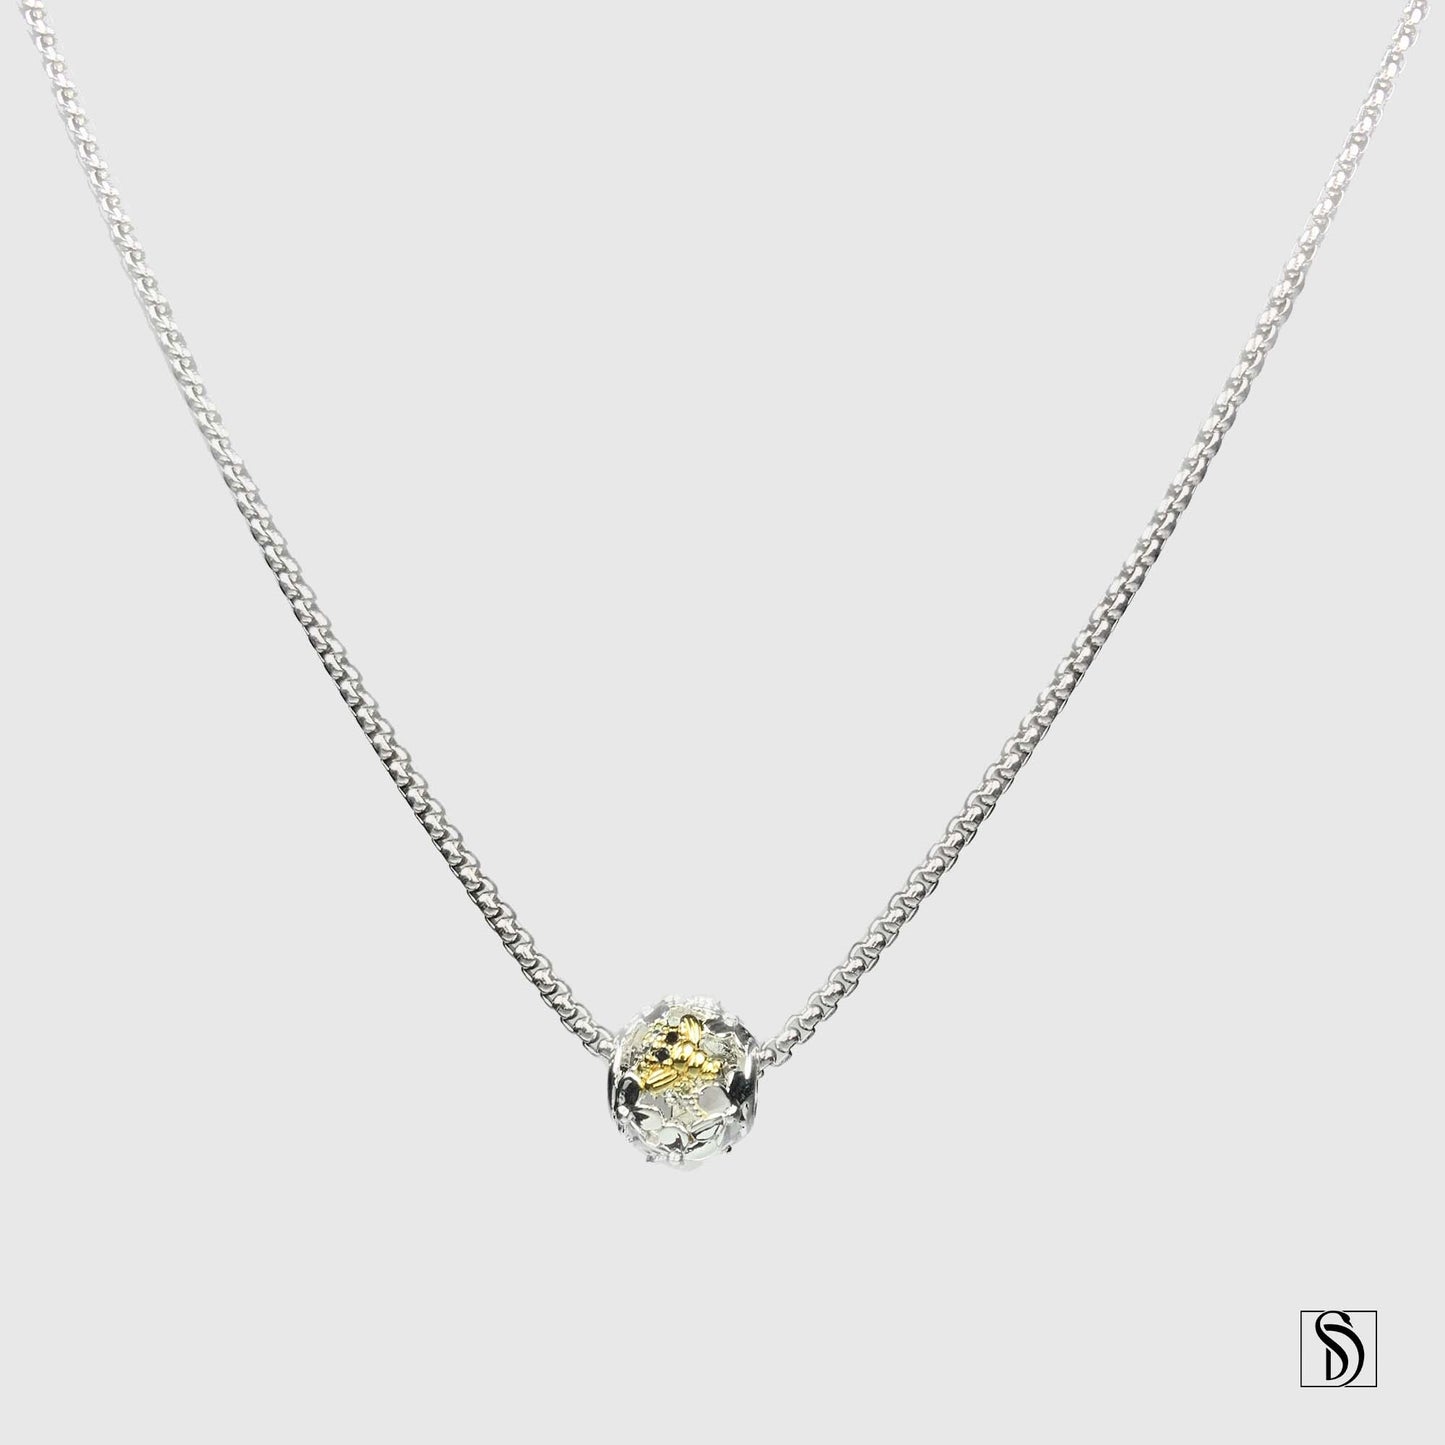 Silver Bumble Bee Two Tones Charm Necklace